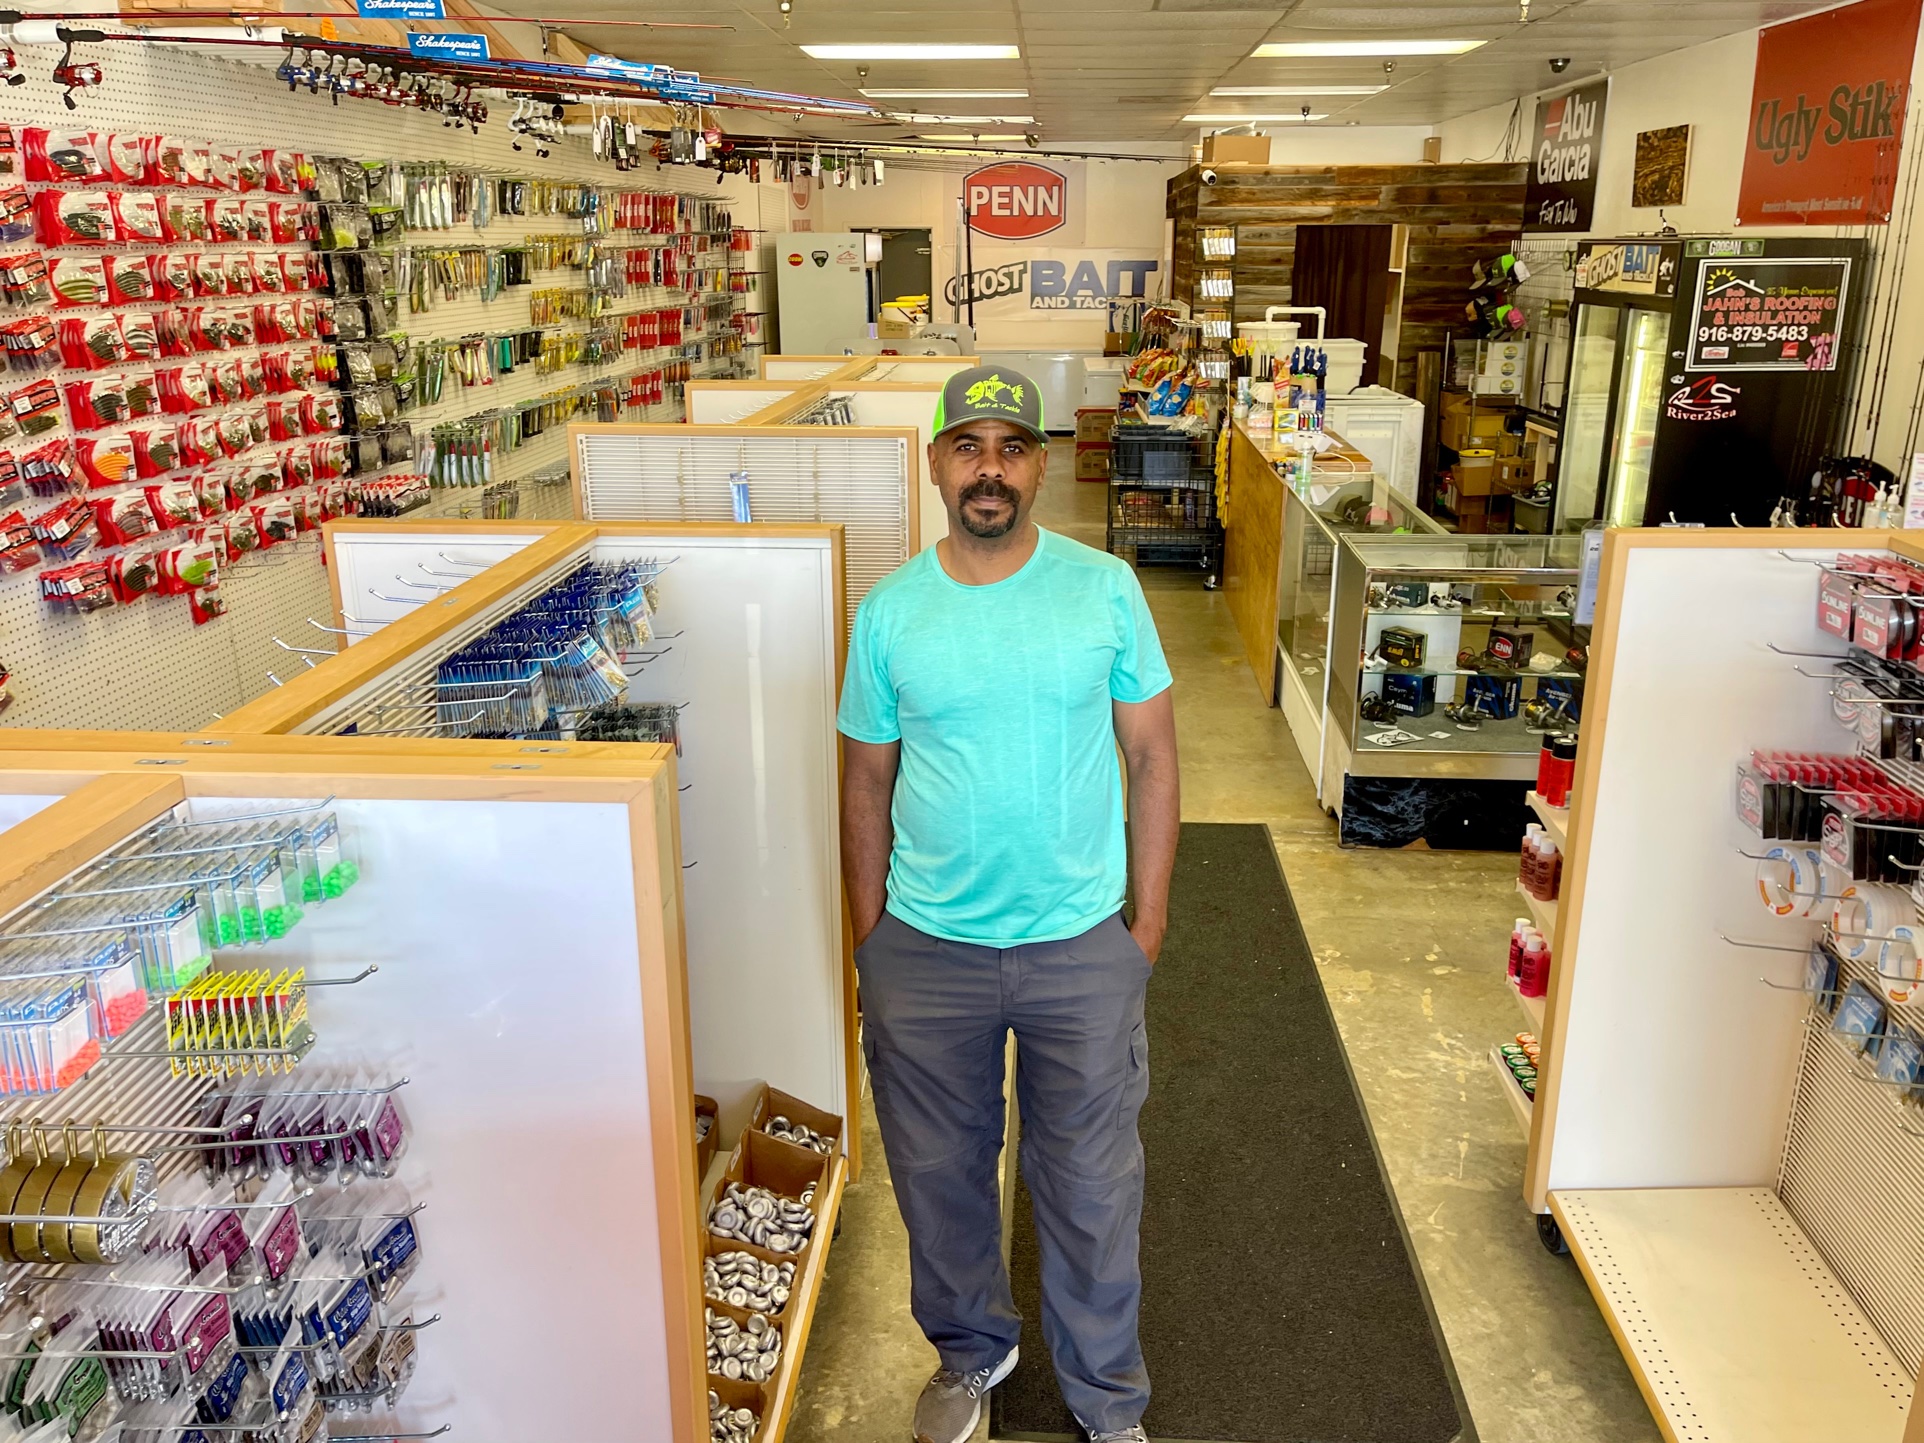 GHOST Bait & Tackle Store Finds Success | The Natomas Buzz